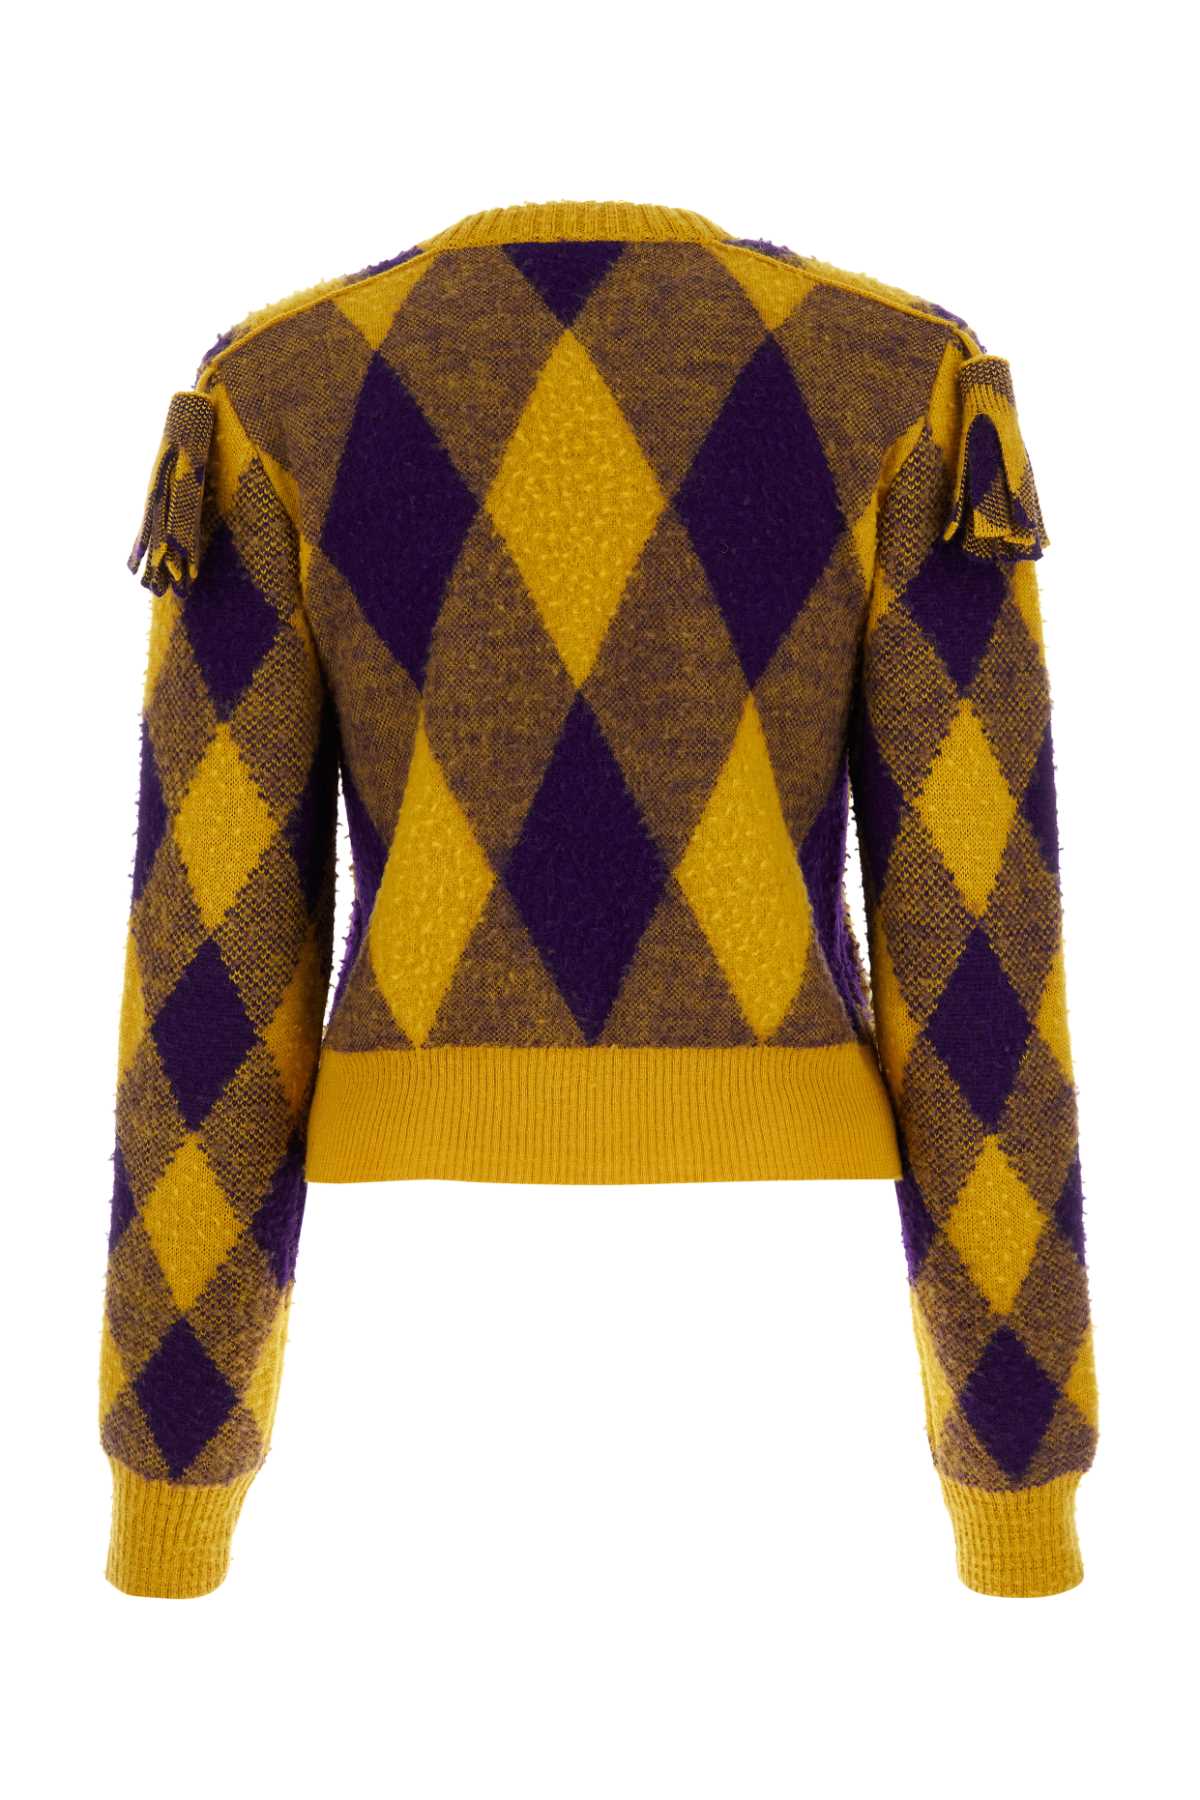 Burberry Embroidered Wool Sweater In Pearippattern